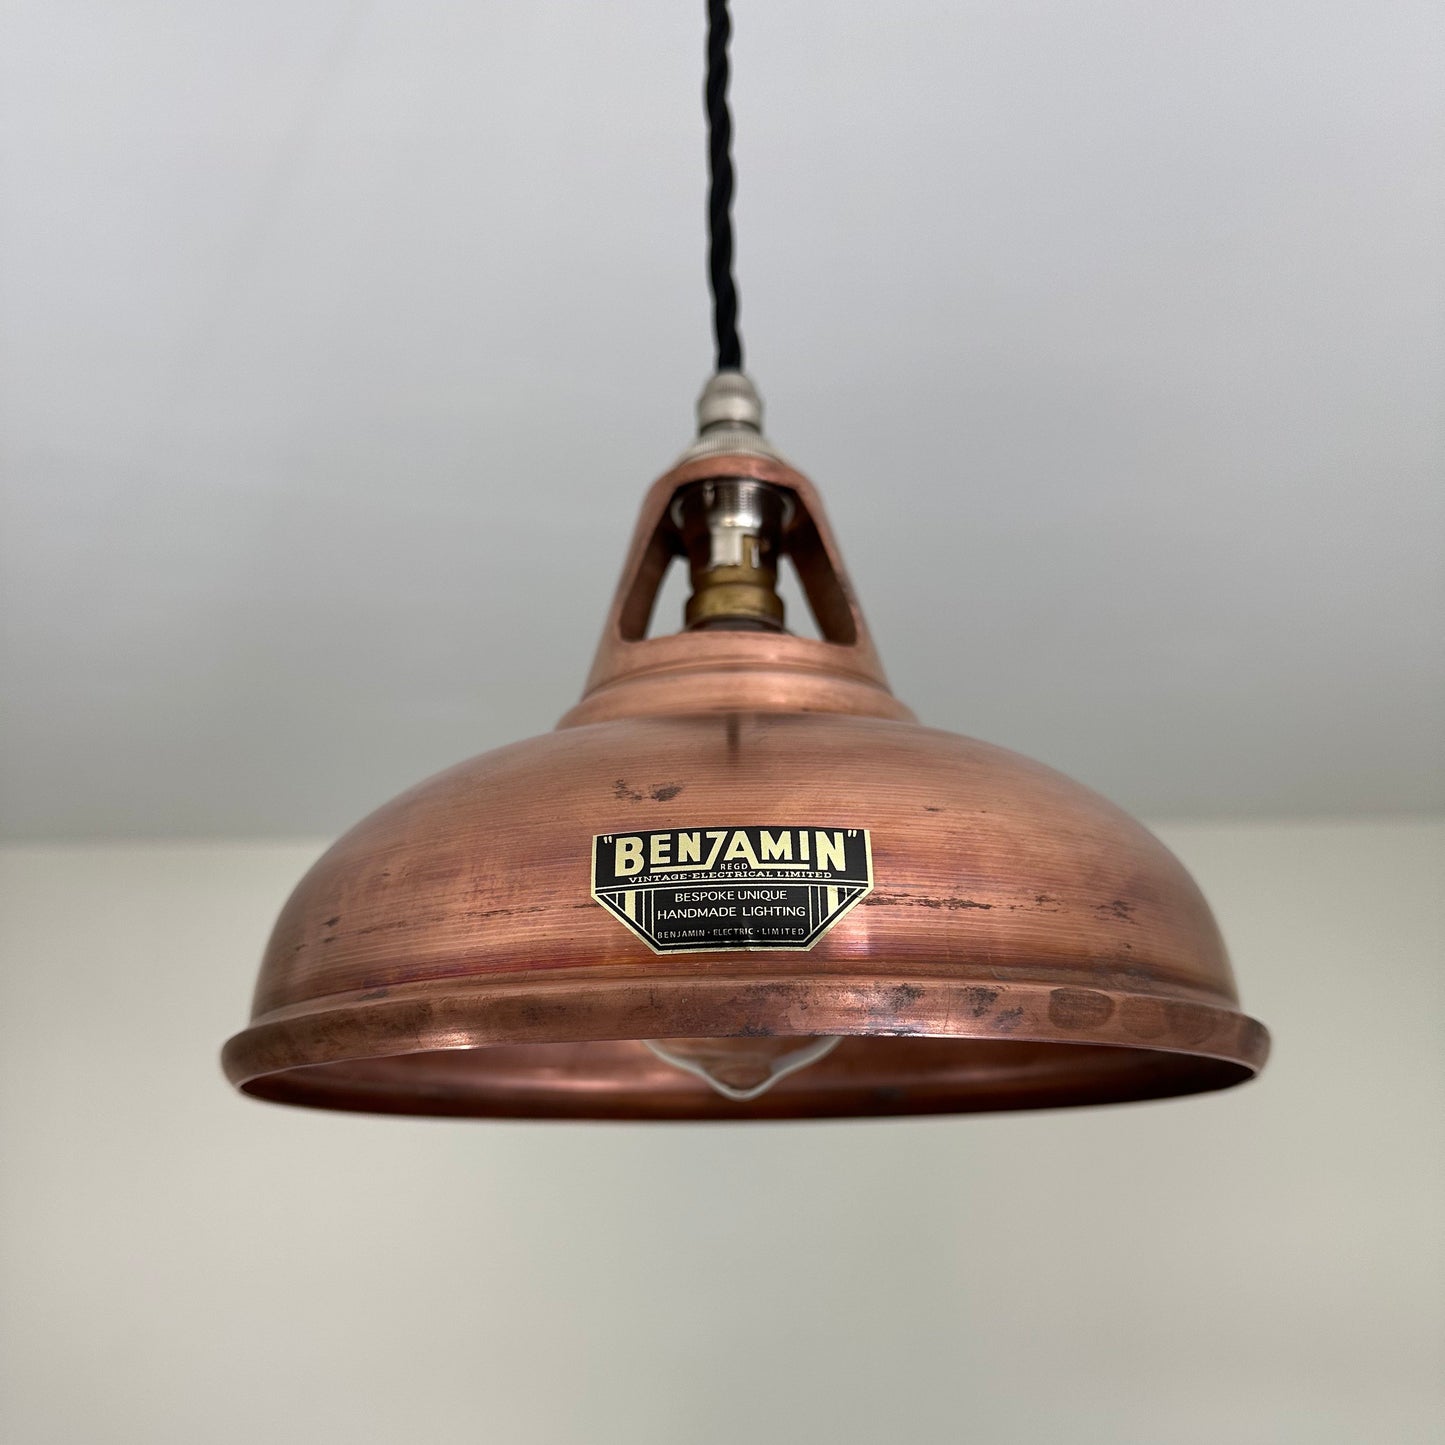 Cawston Small ~ Antique Copper Lampshade Slotted Design Pendant Ceiling Light ~ 9 Inch